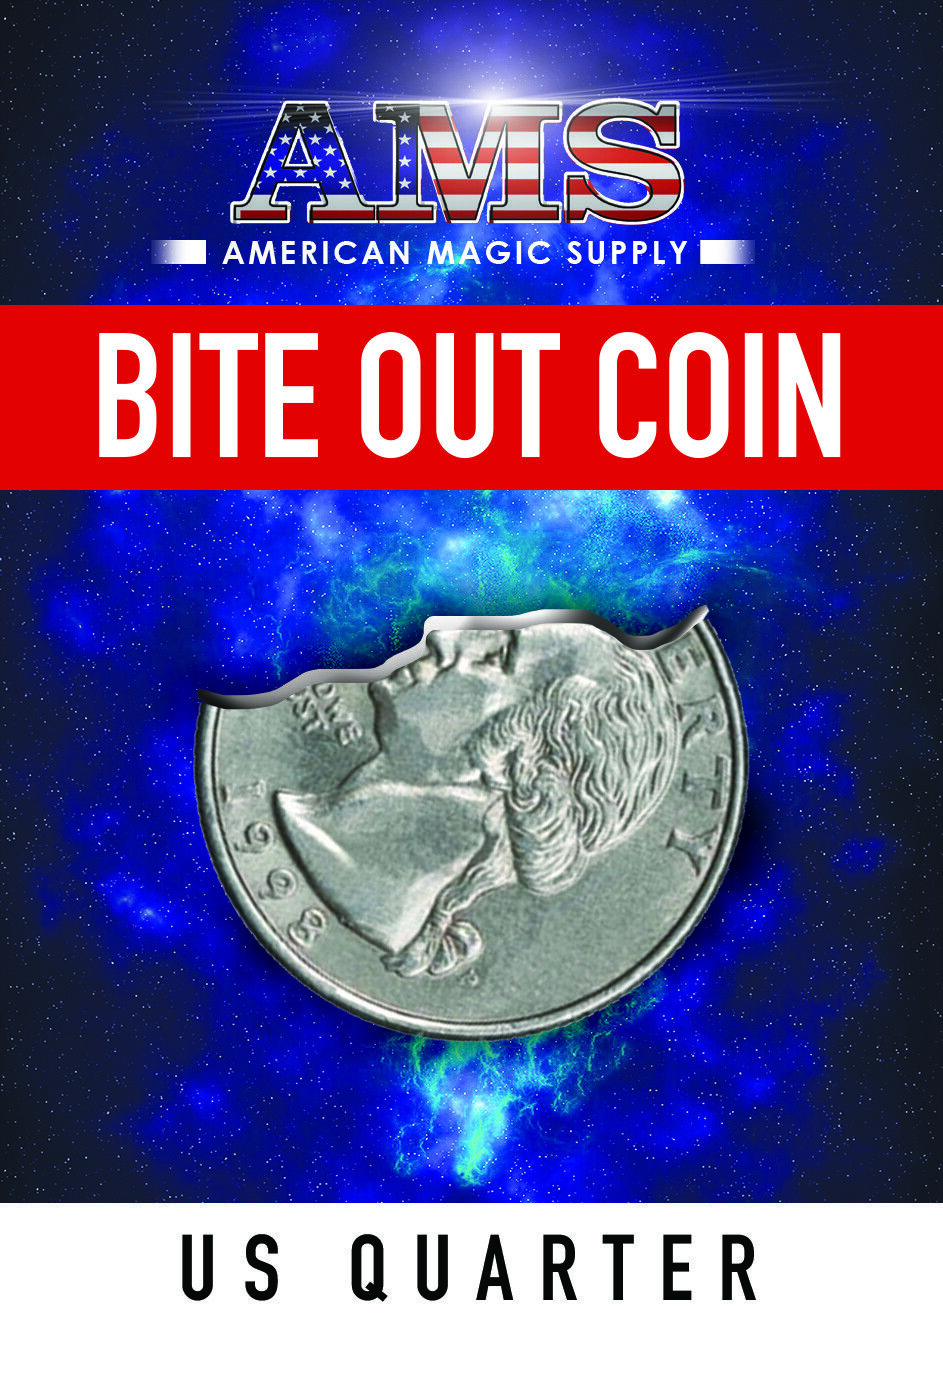 BITE OUT COIN - US QUARTER by AMERICAN MAGIC SUPPLY